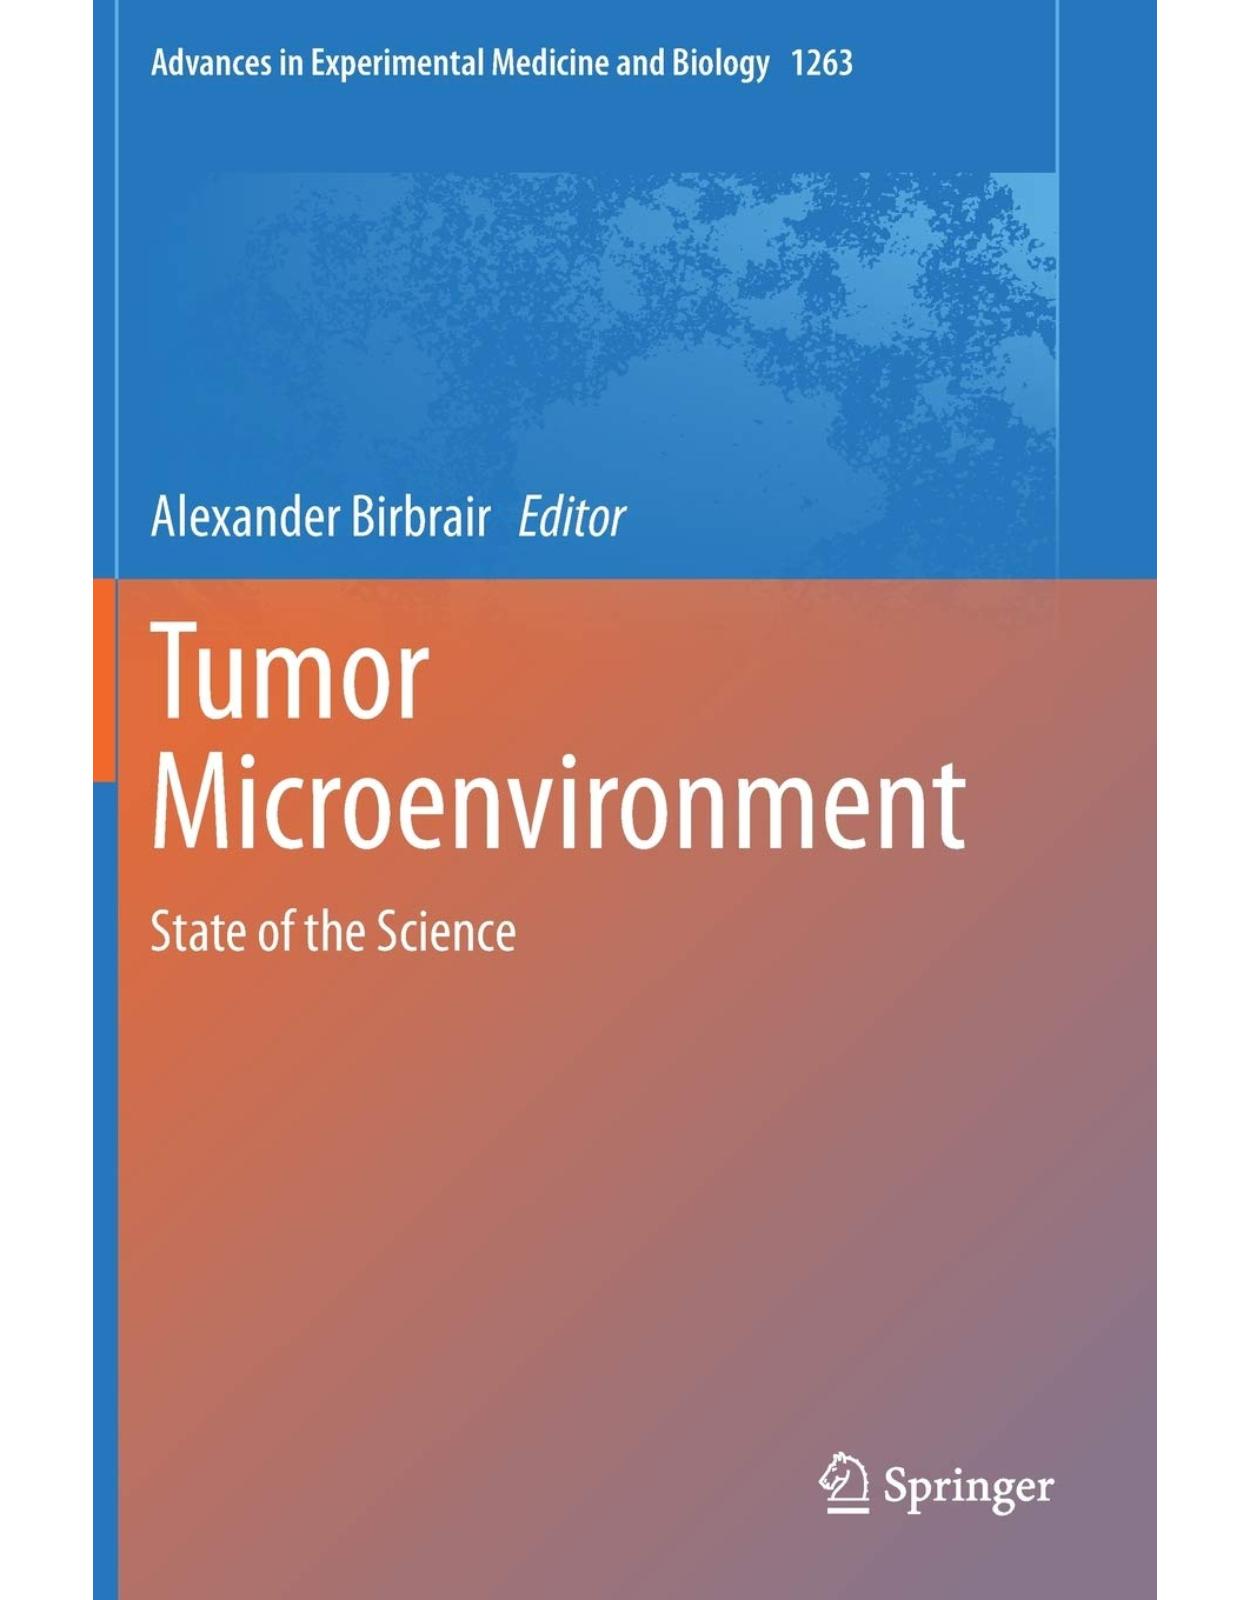 Tumor Microenvironment. State of the Science